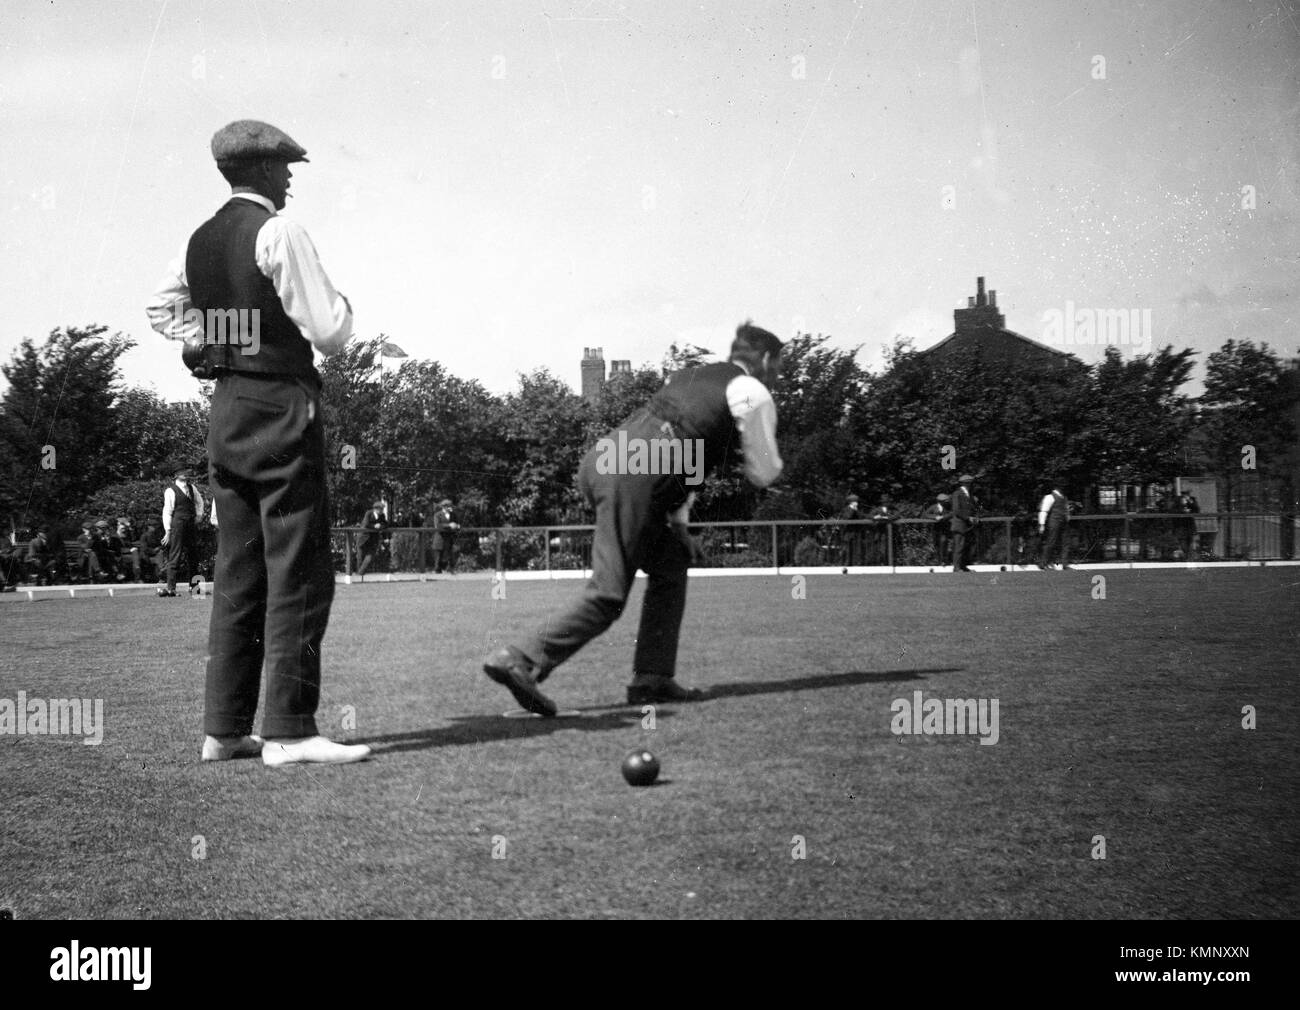 A match in action. c1919 Crown Green Bowls, England.  Photo by Tony Henshaw Stock Photo